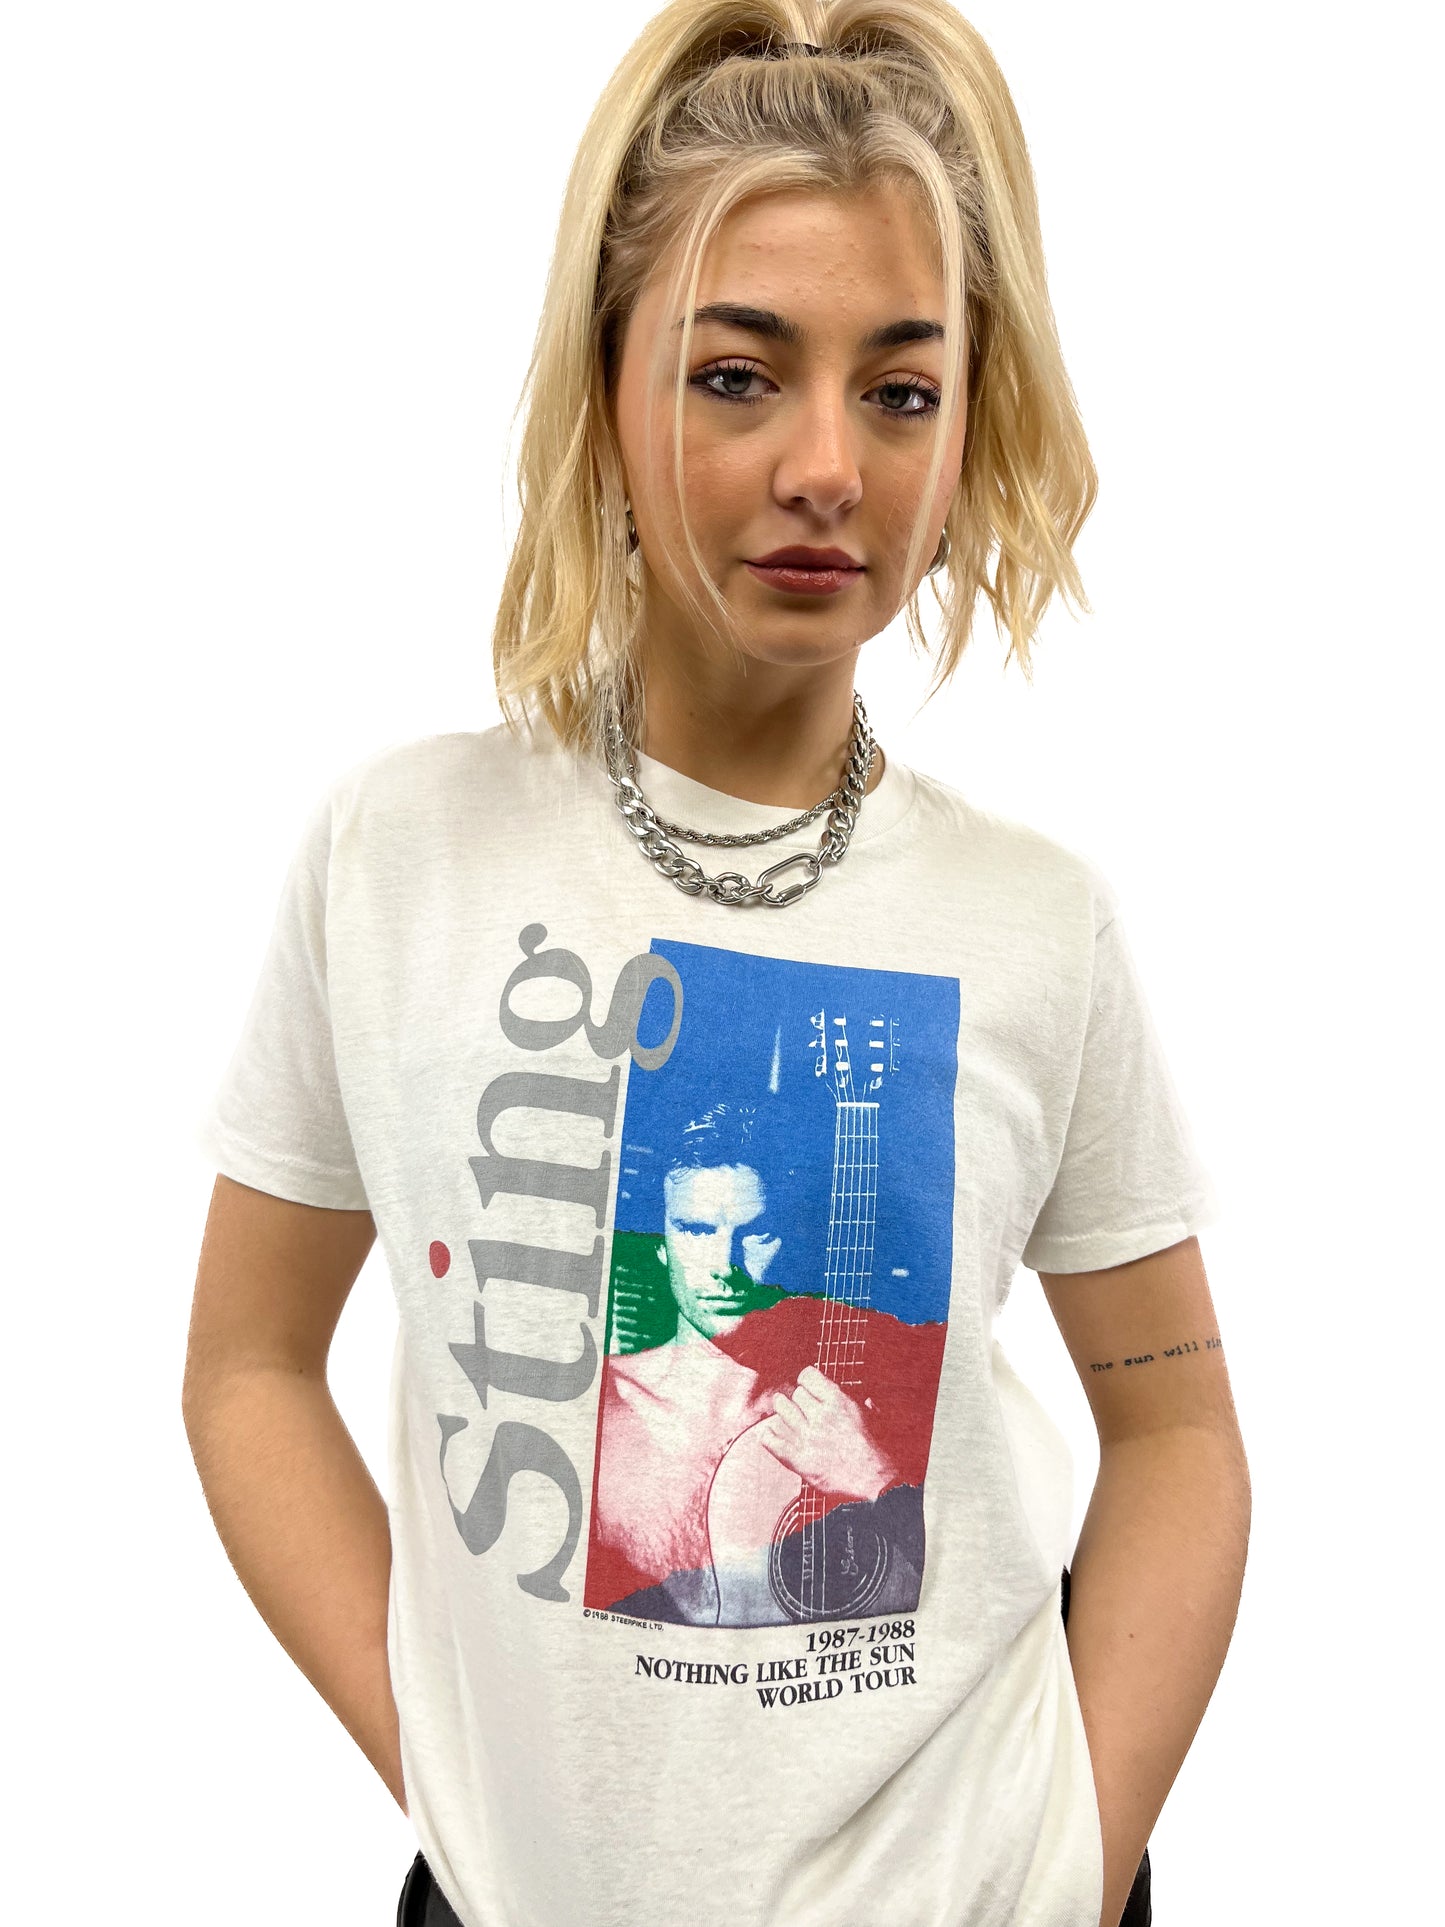 80s Sting "Nothing Like The Sun" Tour Tee